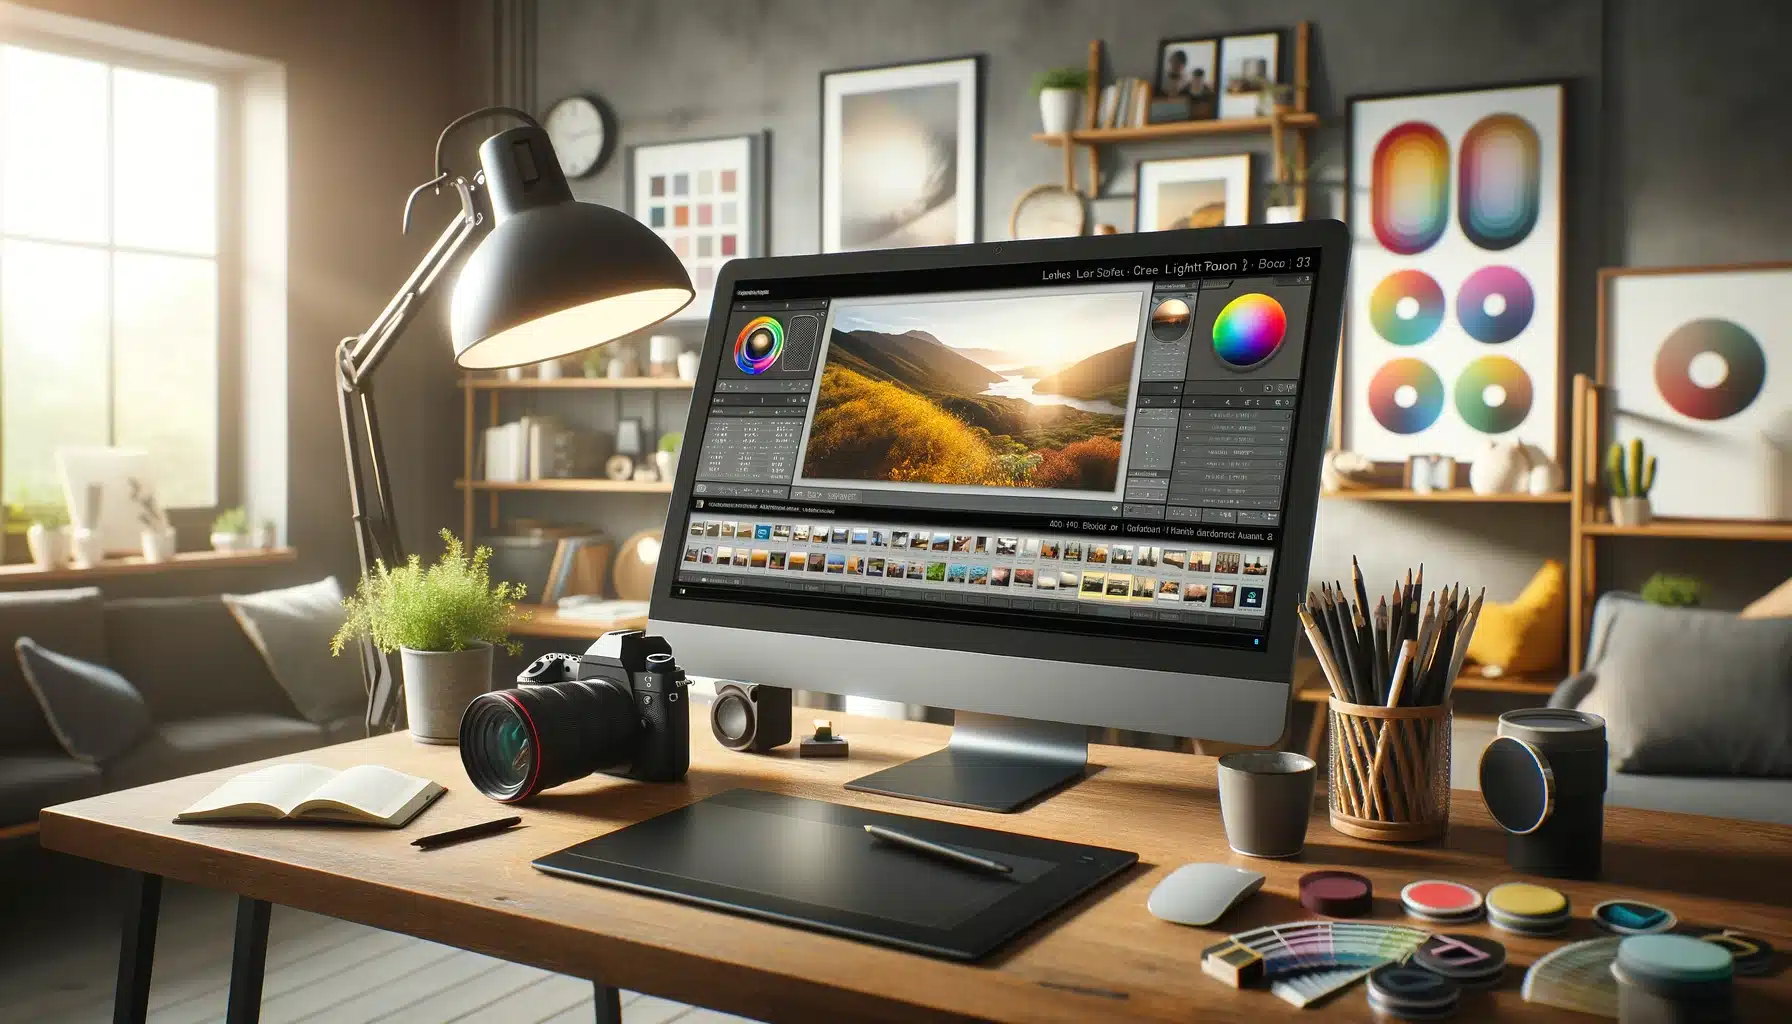 Modern desk setup with a high-resolution monitor displaying Adobe LR and PS interfaces, surrounded by photo editing tools and natural lighting.